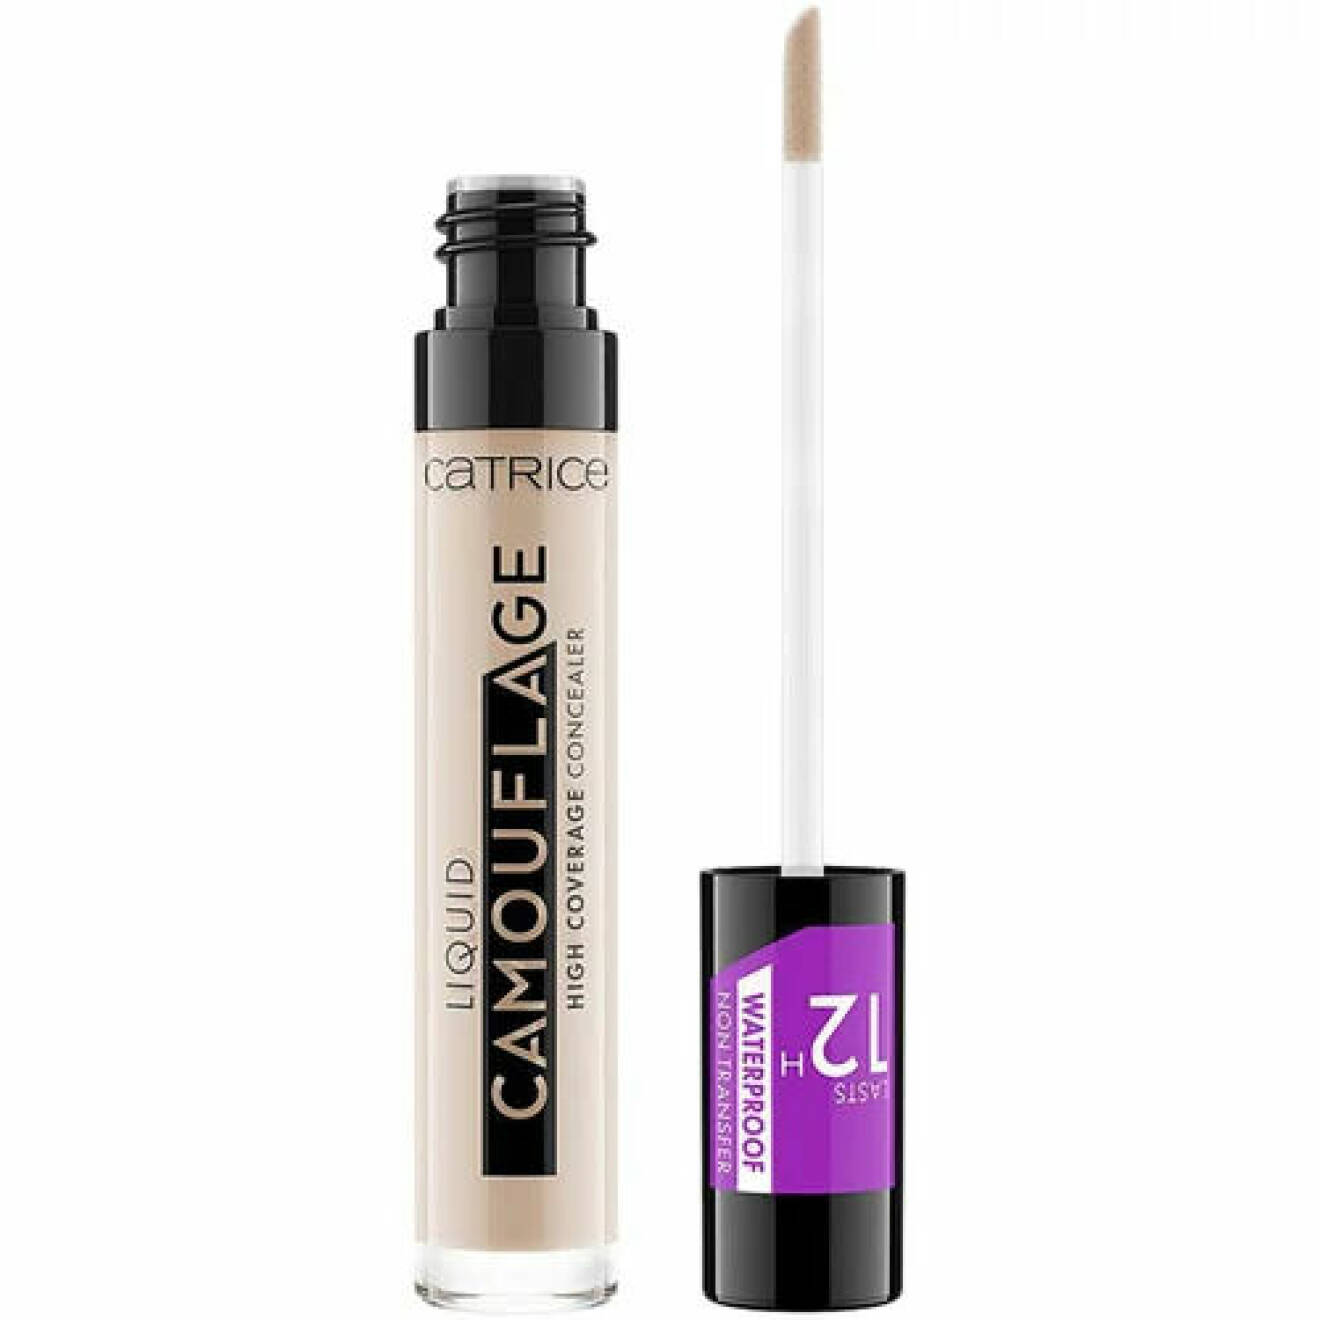 Catrice – Camouflage Concealer